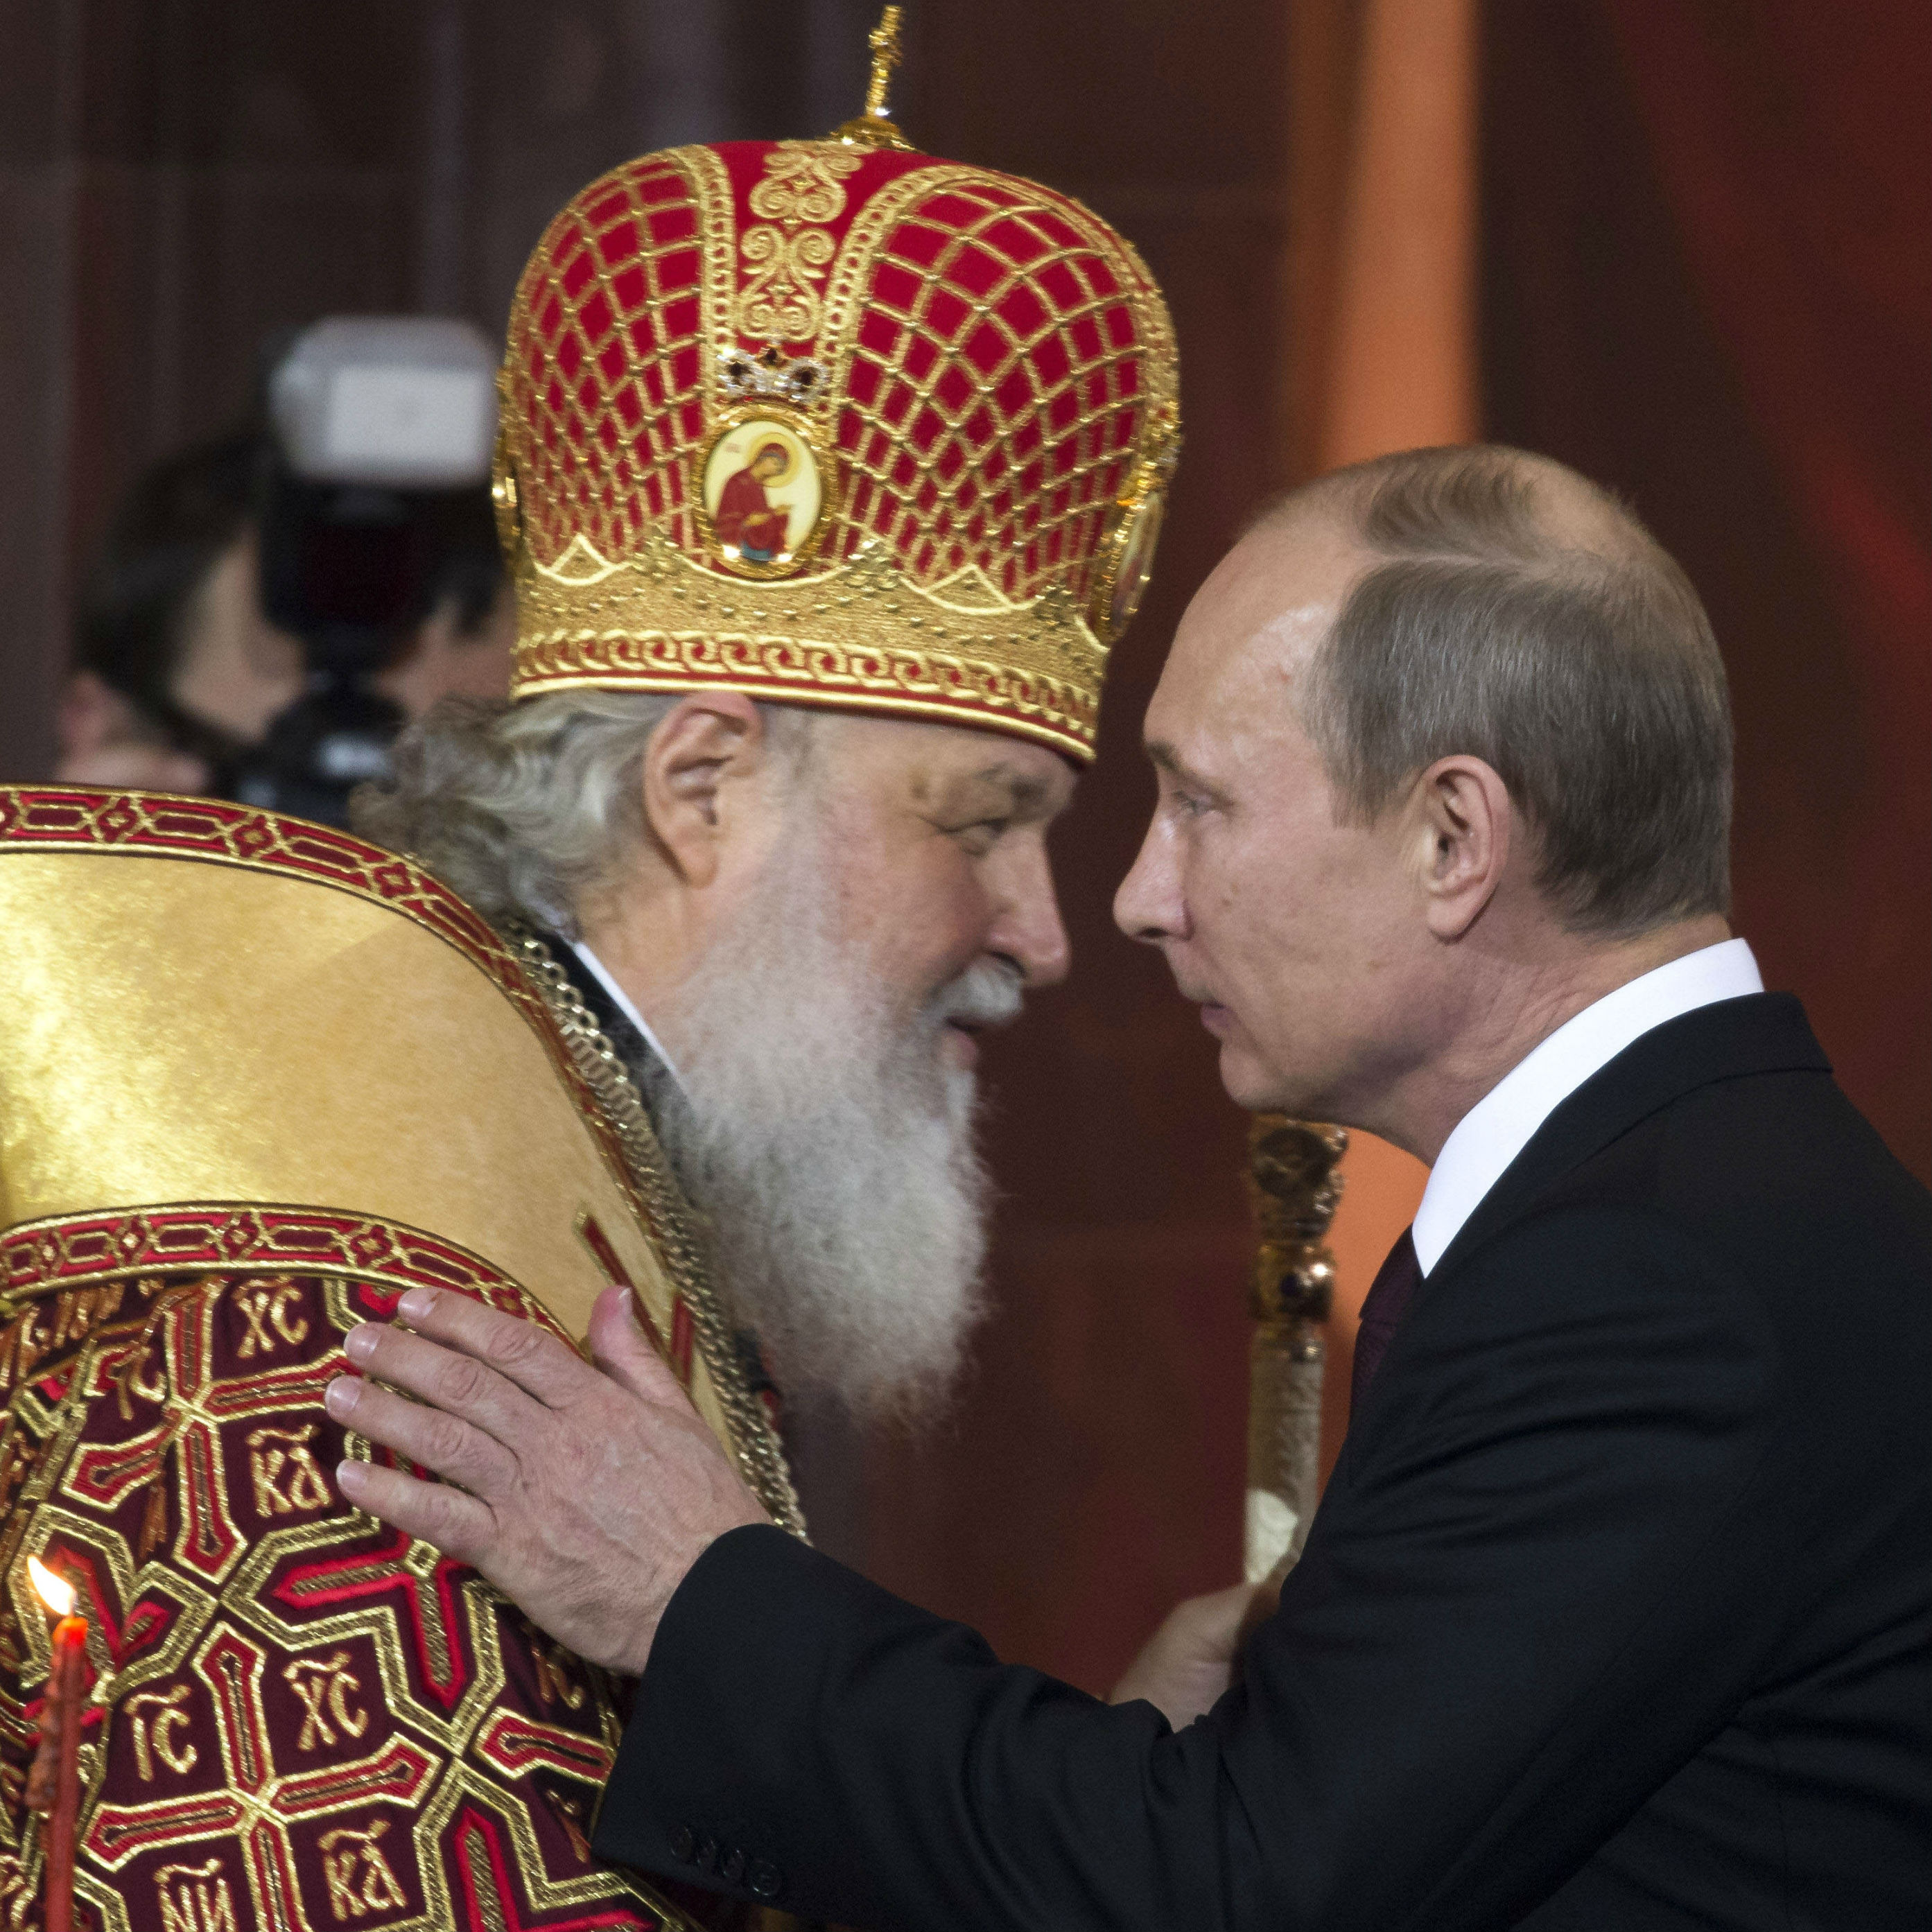 Russian Patriarch says Crete meeting is not pan-Orthodox